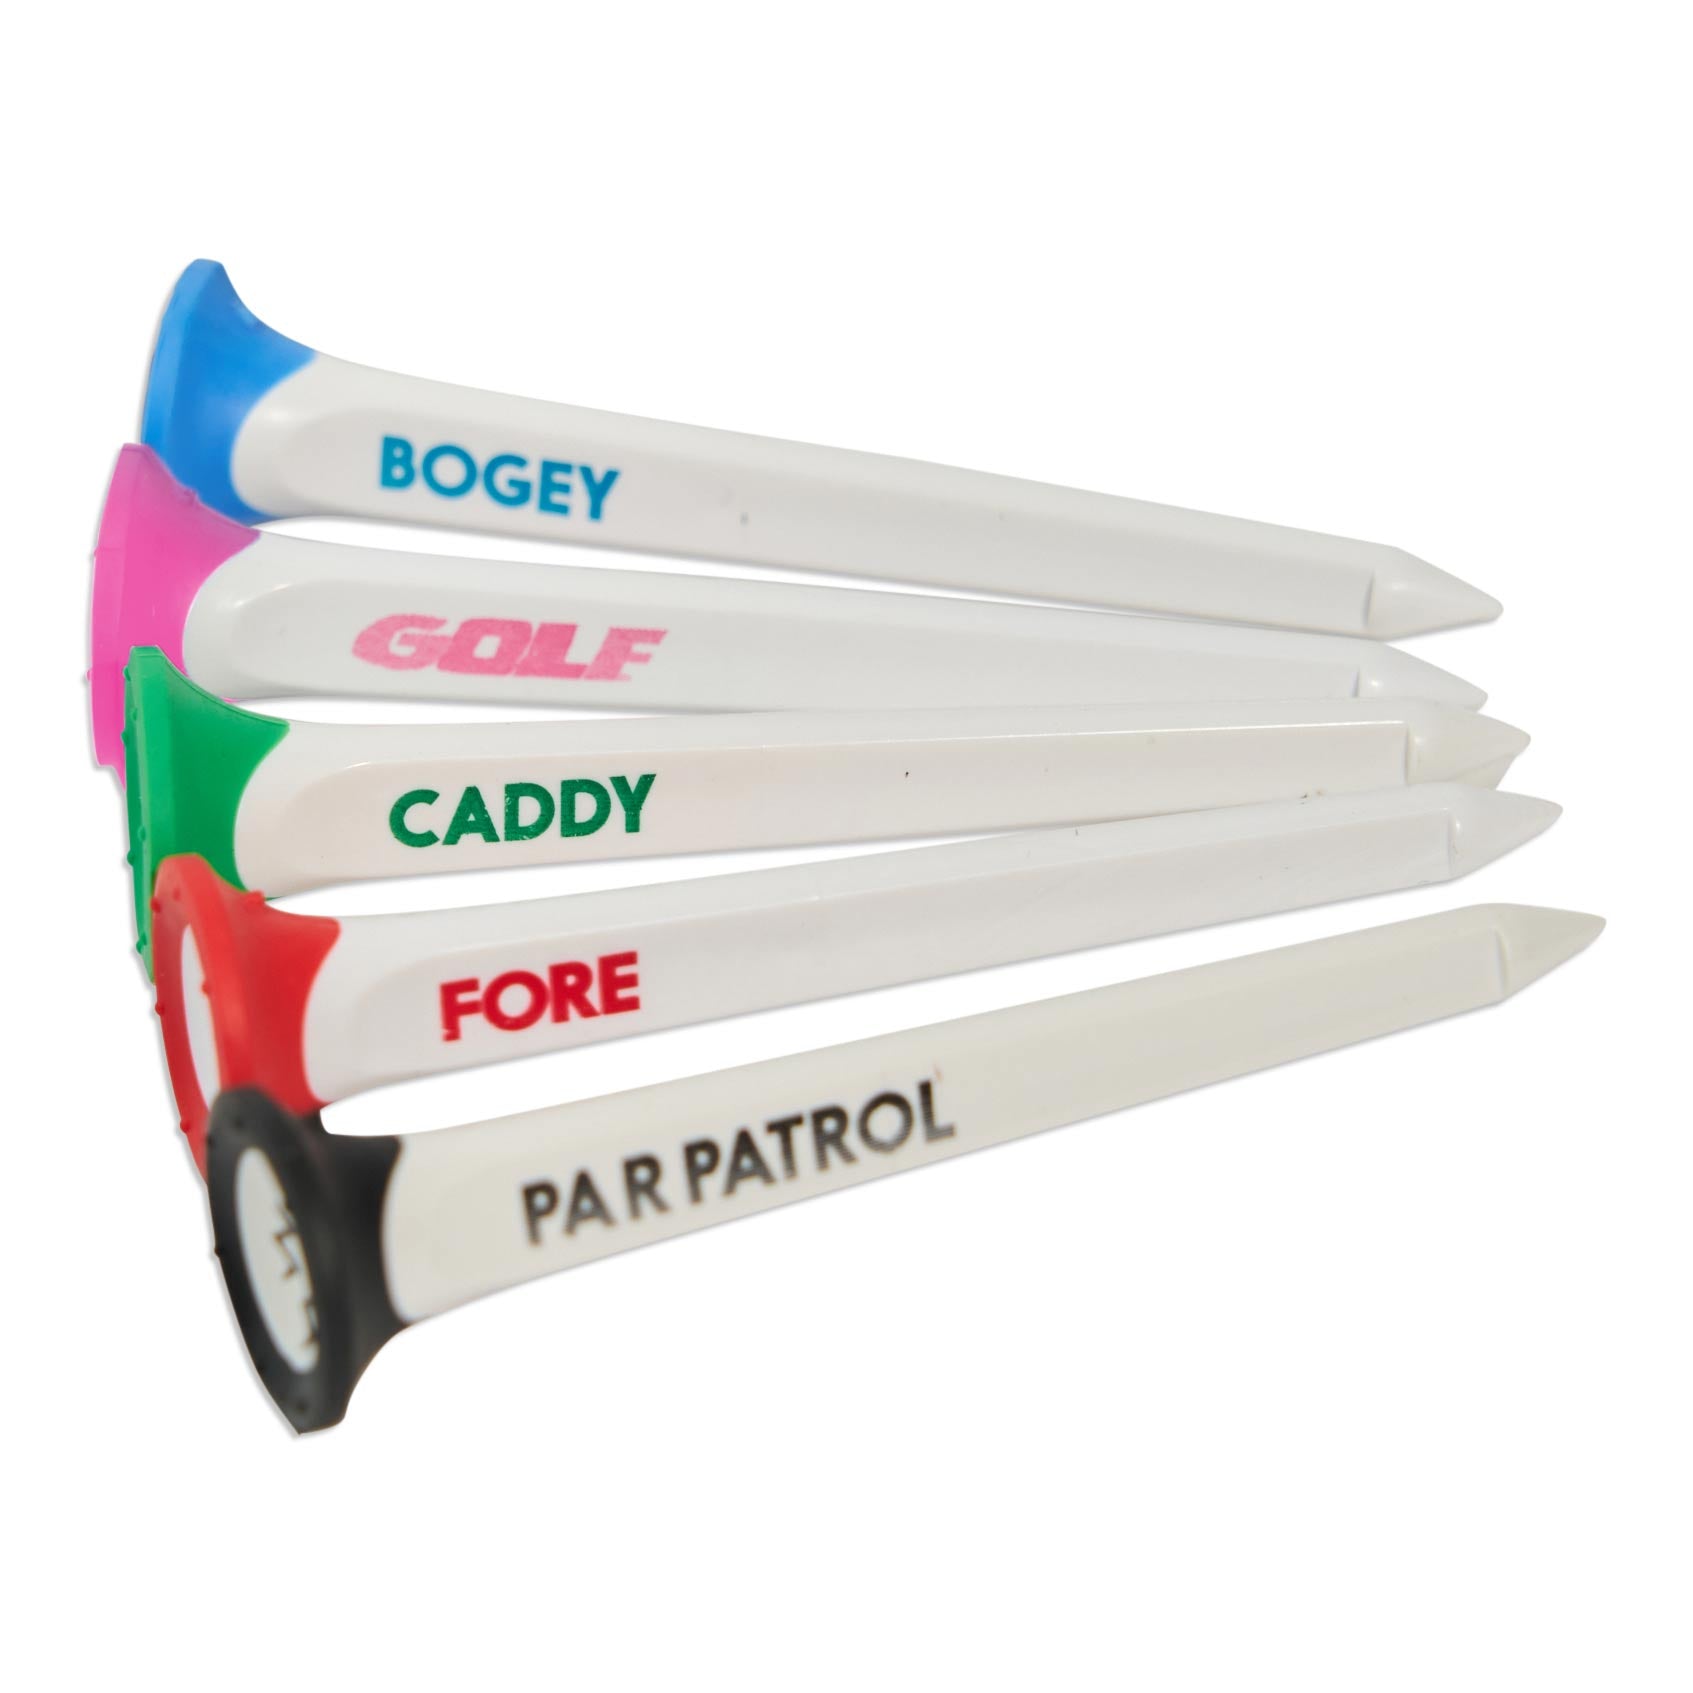 Enhance your golf game with Birds of Condor & Tour Tee's eco-friendly, USGA-compliant tees. Less friction, more distance, and stamped for fun. Grab a pack of 5 with 80mm rockets for powerful drives!